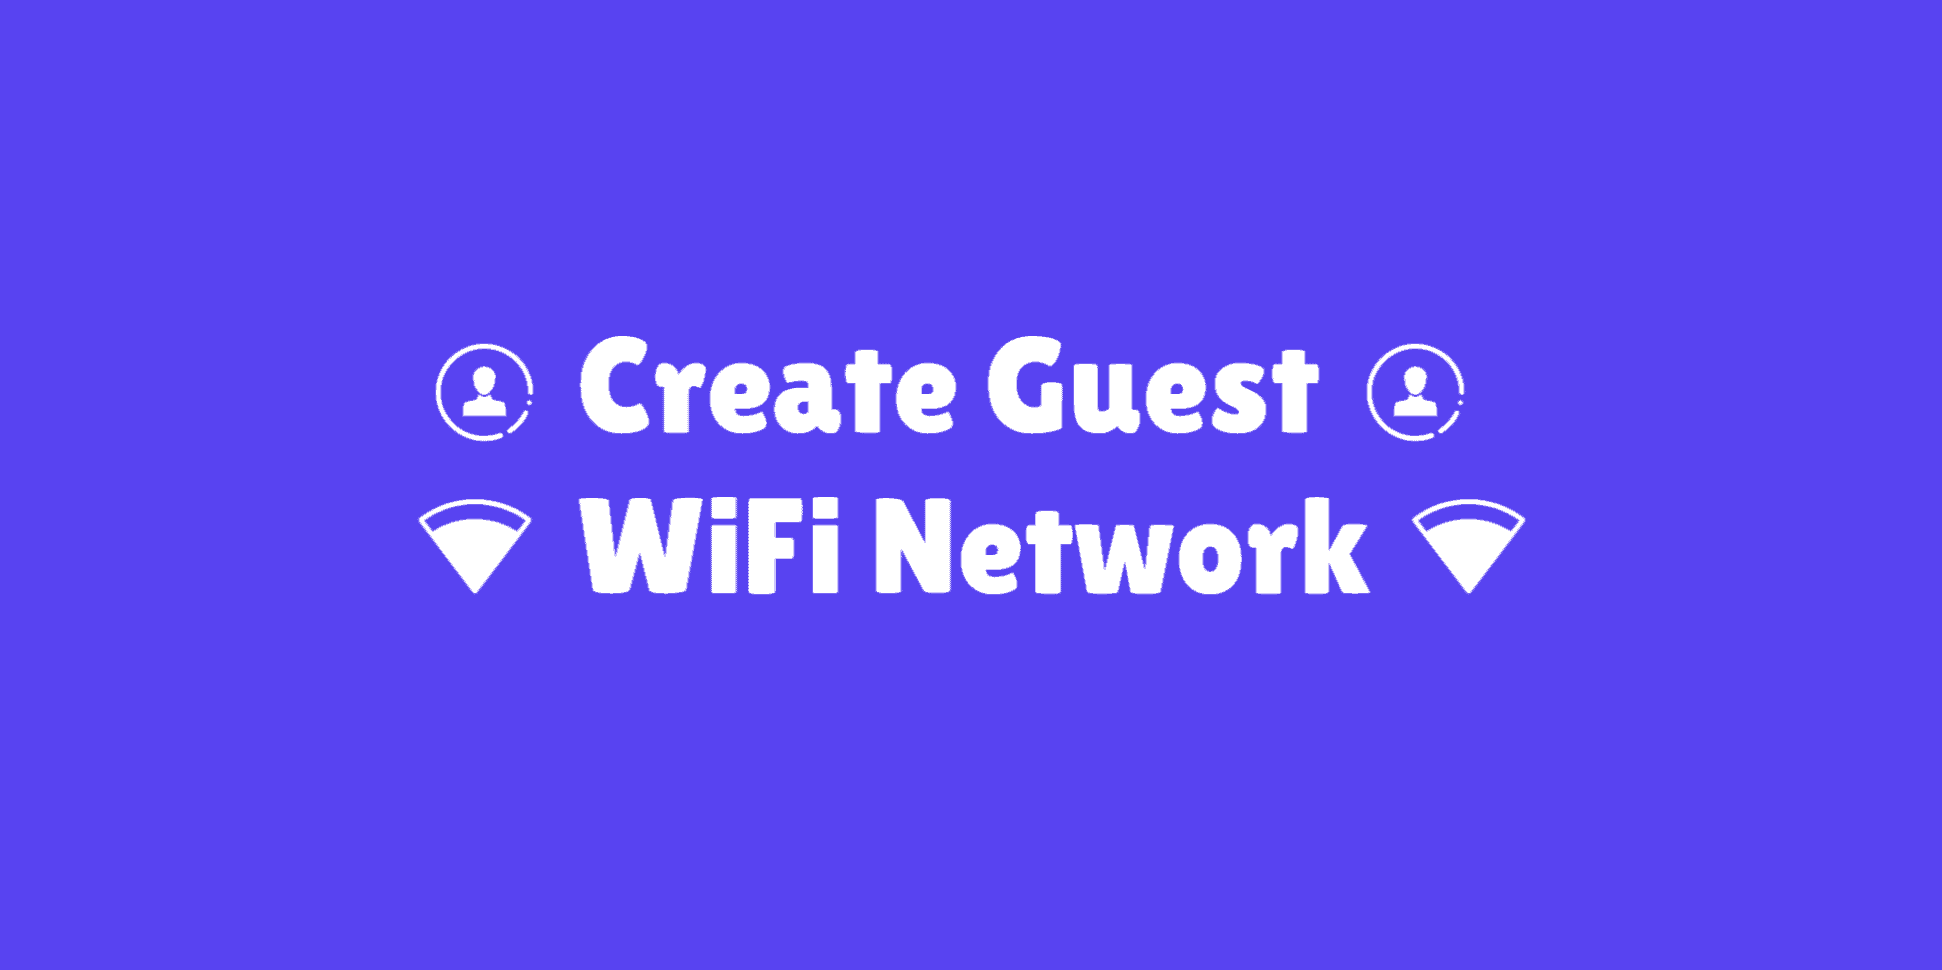 nest hello can only connects to guest wifi